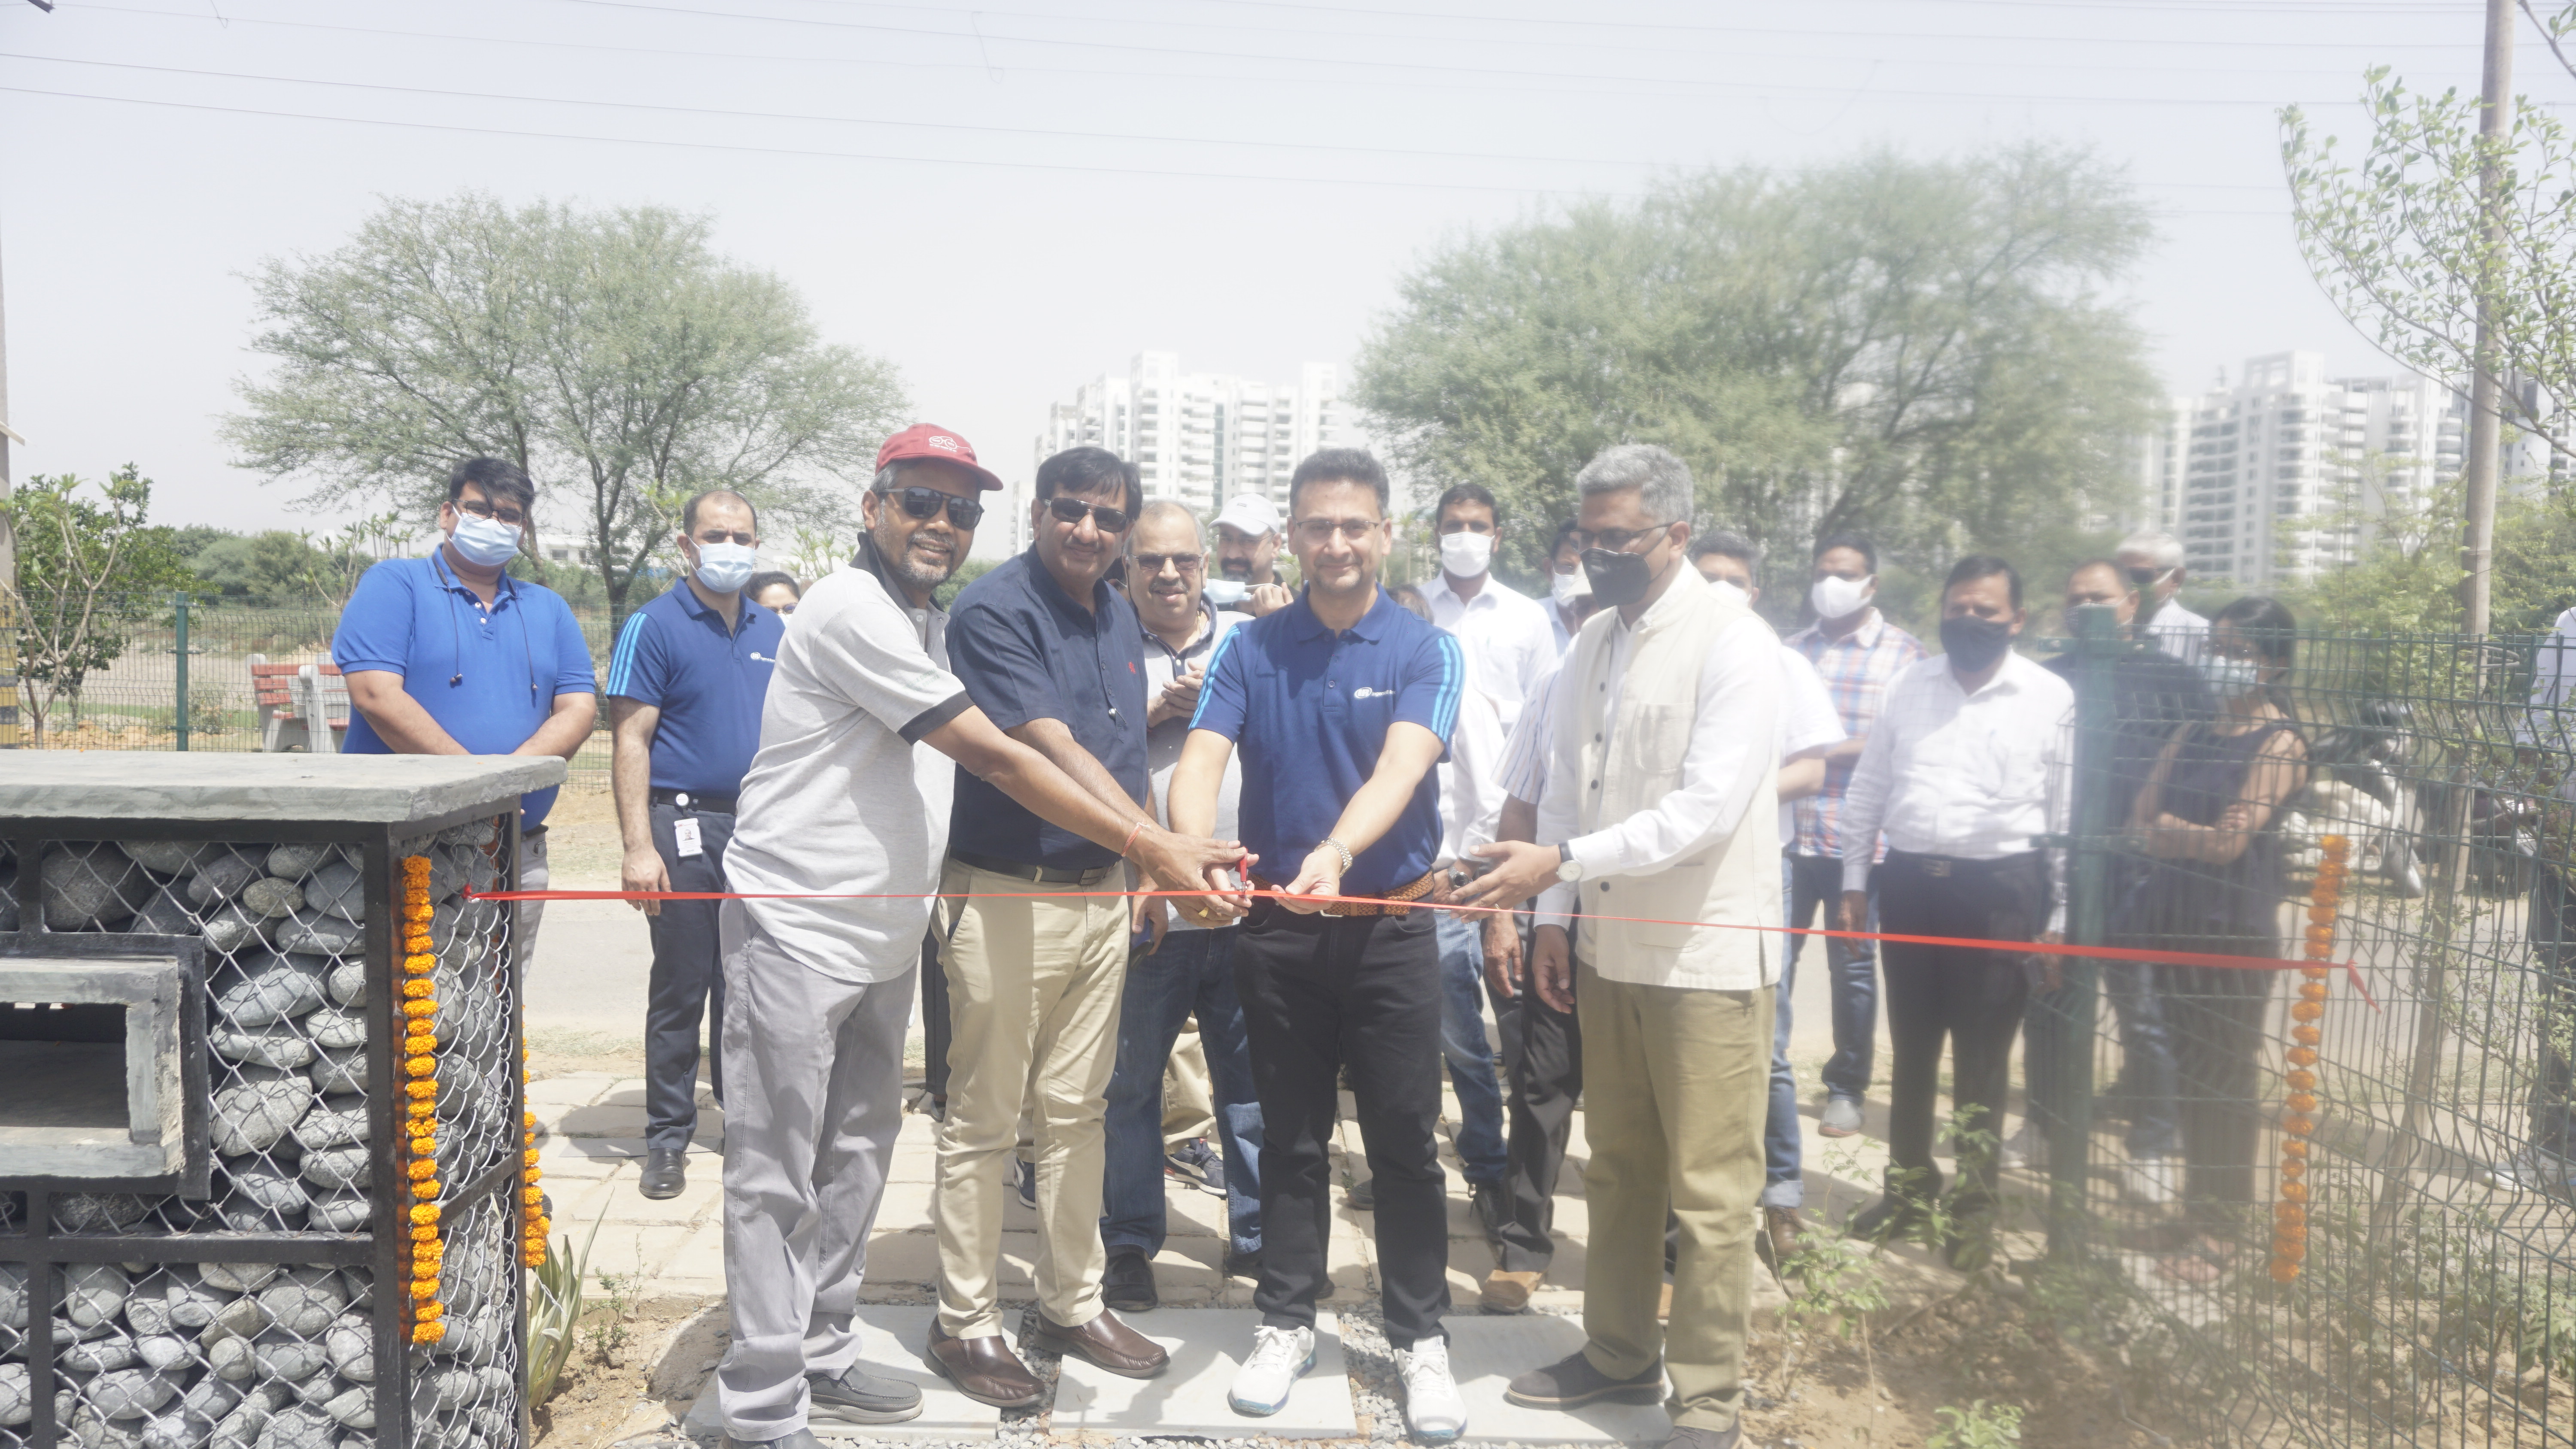 ingersoll-rand-india-partner-for-nature-based-solutions-with-new-lake-view-park-in-gurugram_part-1